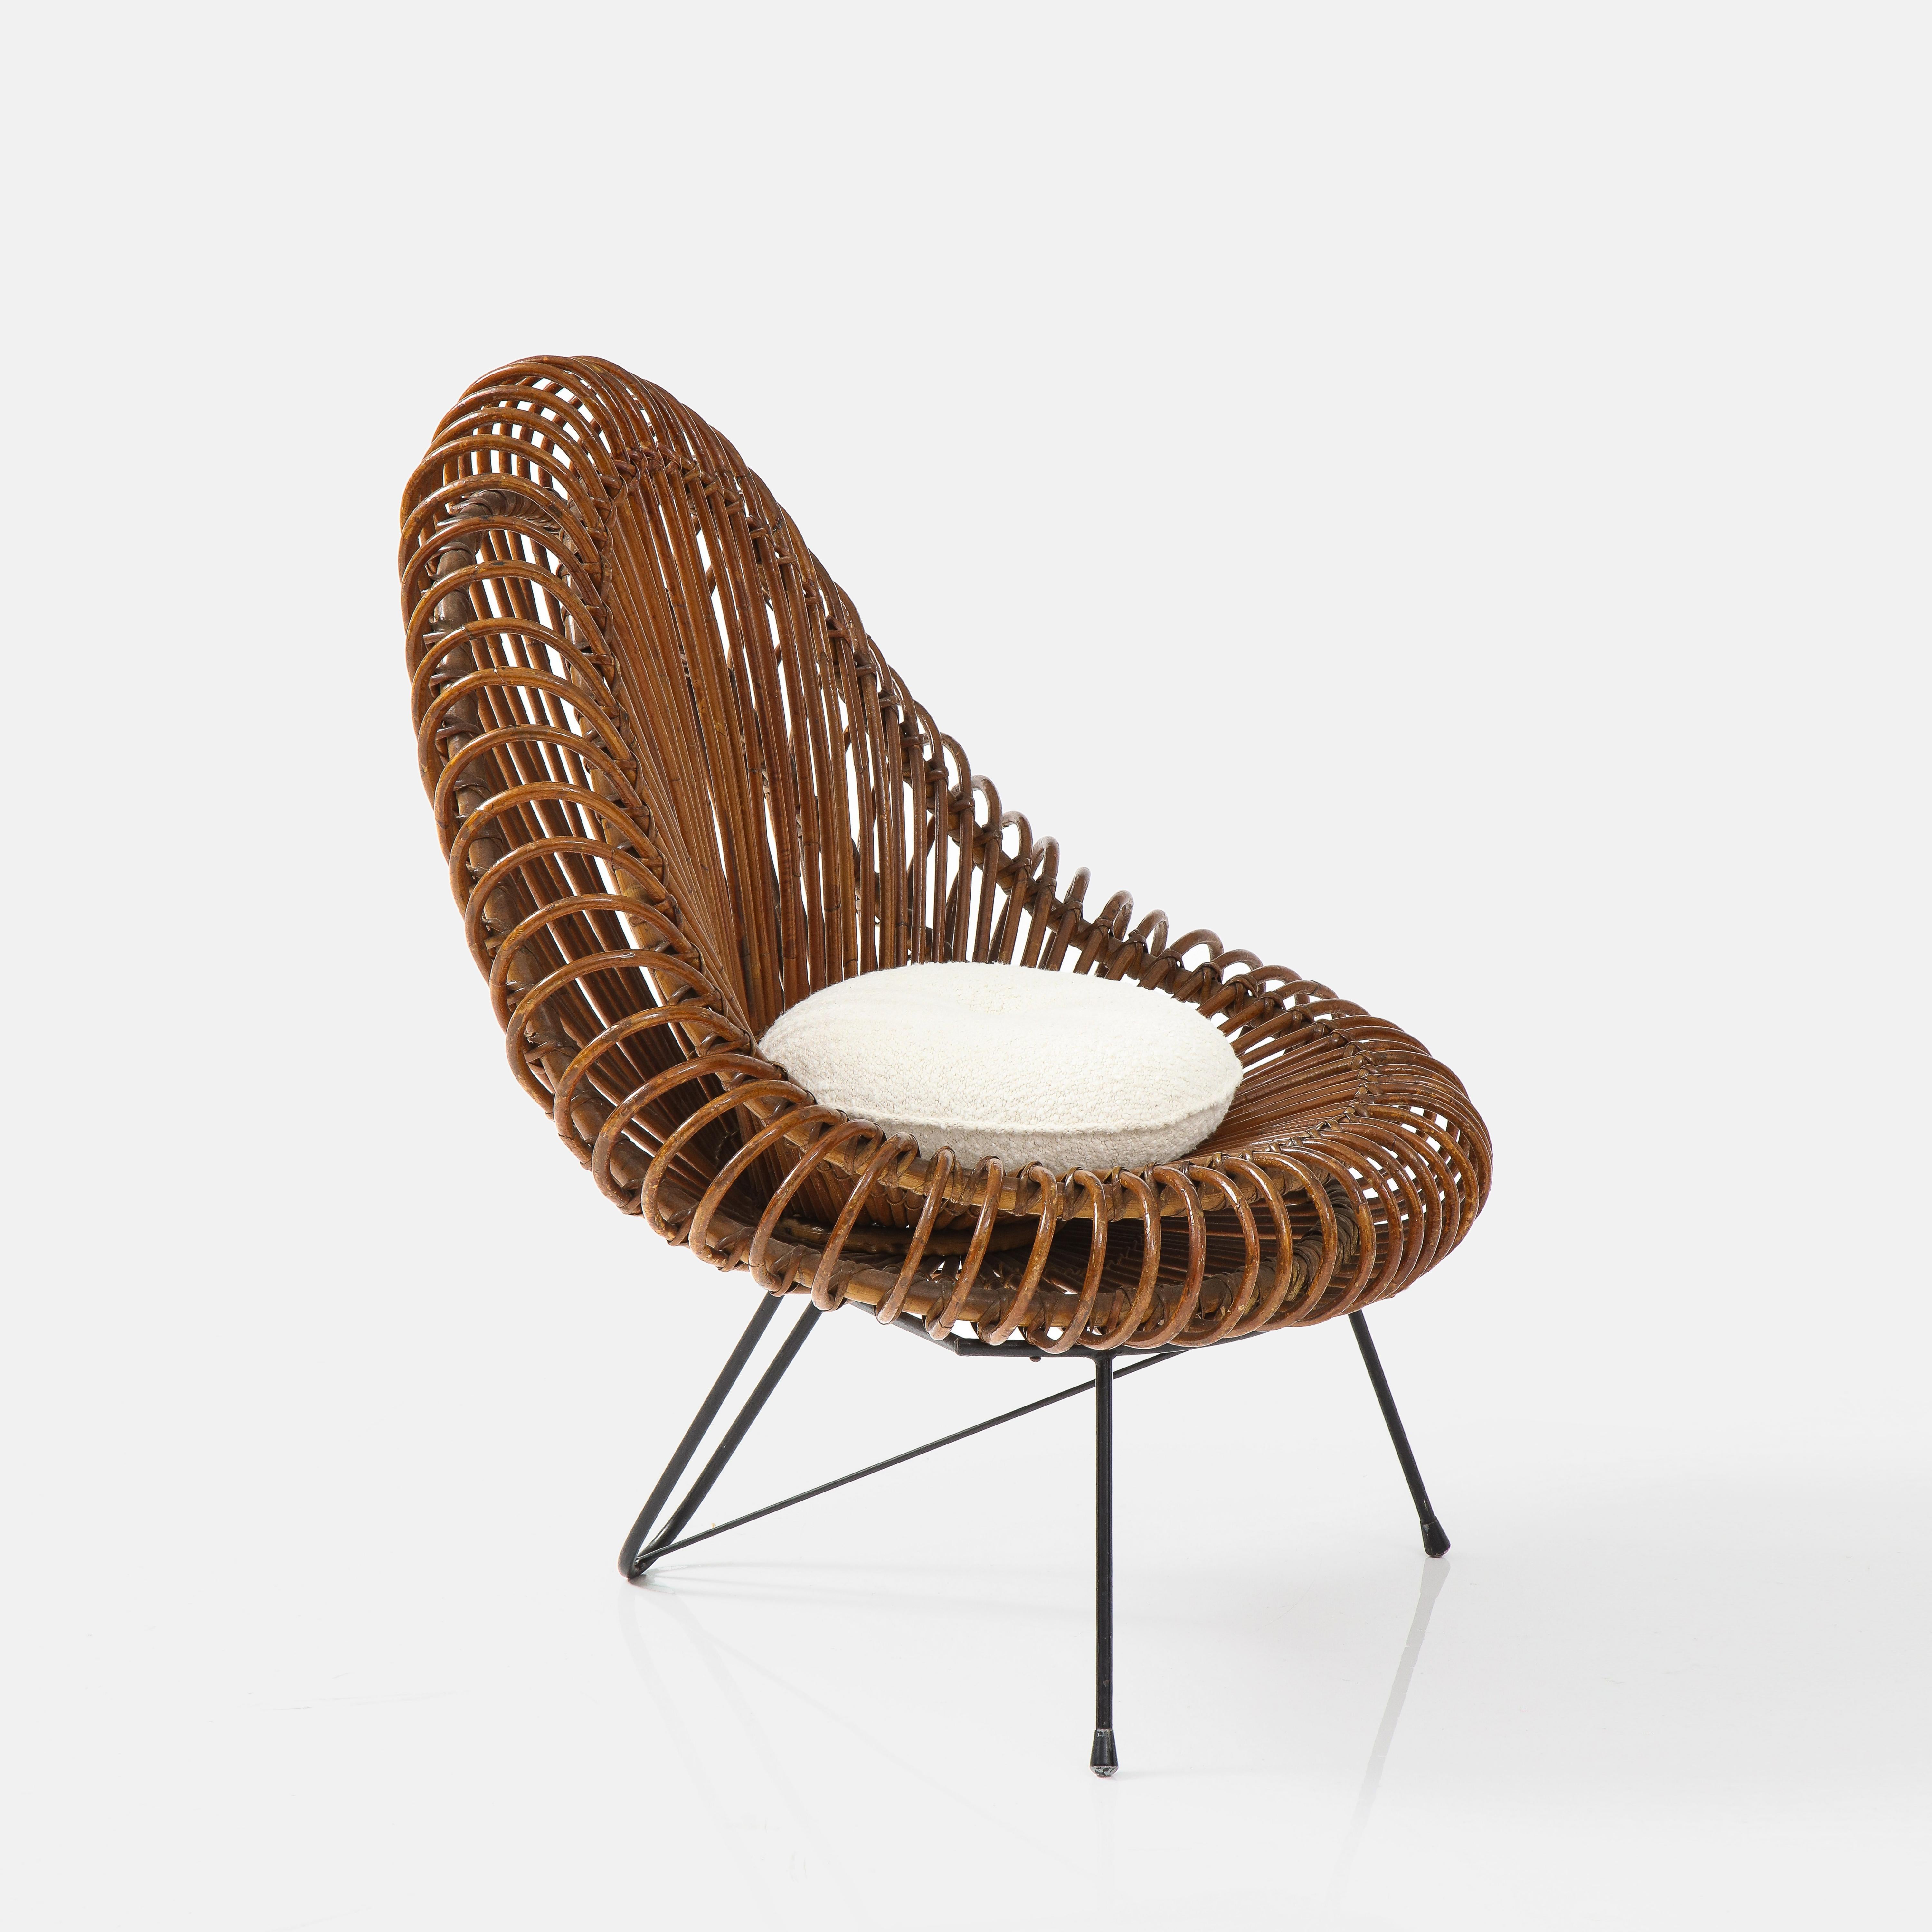 Mid-20th Century Janine Abraham and Dirk Jan Rol Sculptural Rattan Lounge Chair, France, 1950s For Sale